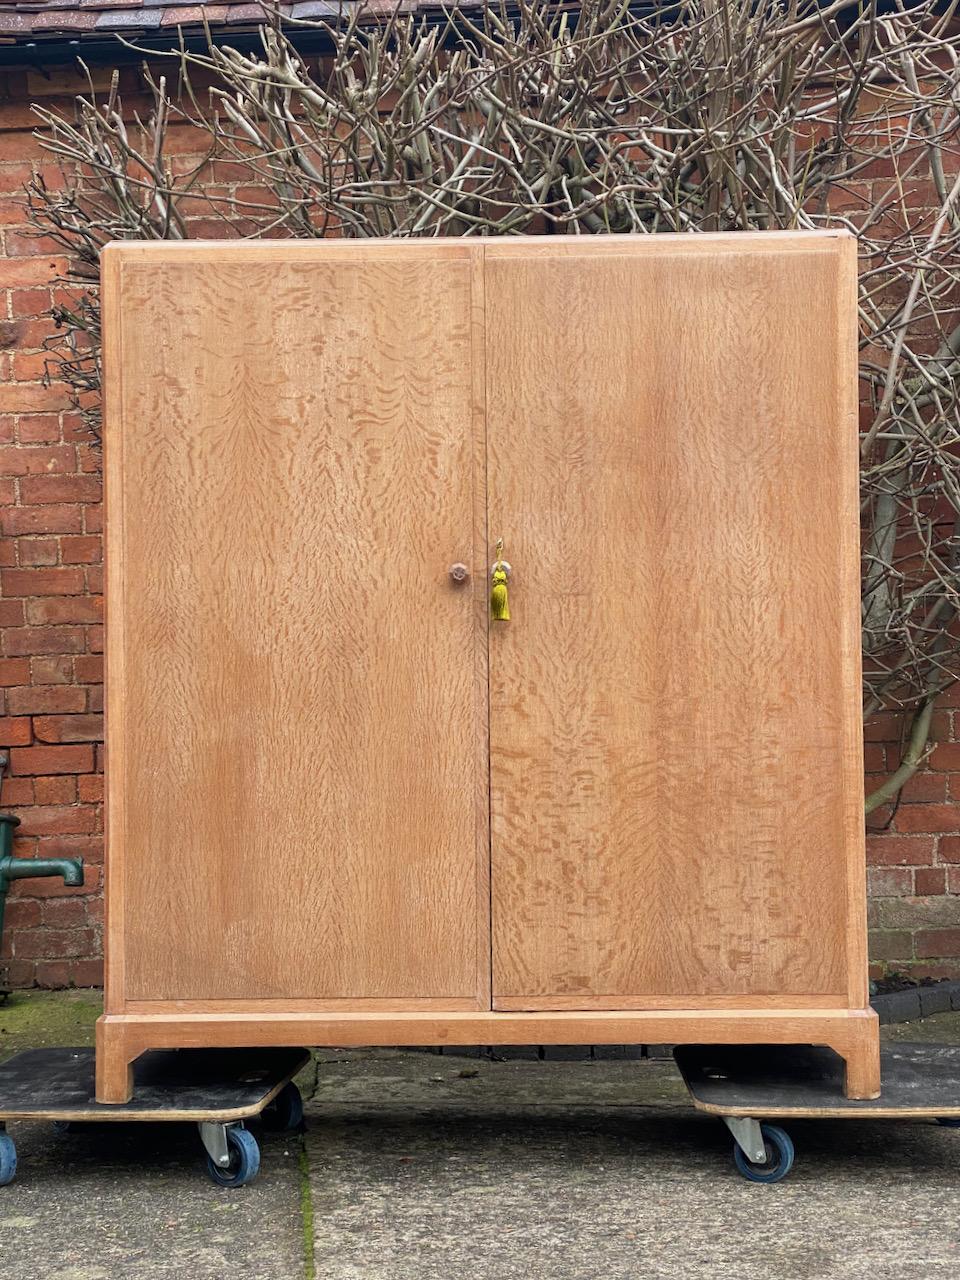 Magnificent early 20th century heal’s attributed limed oak two-door wardrobe compactum, England, circa 1930.

The rectangular top with canted corners over two figured, panelled solid oak doors with carved knob handles opening to reveal brass